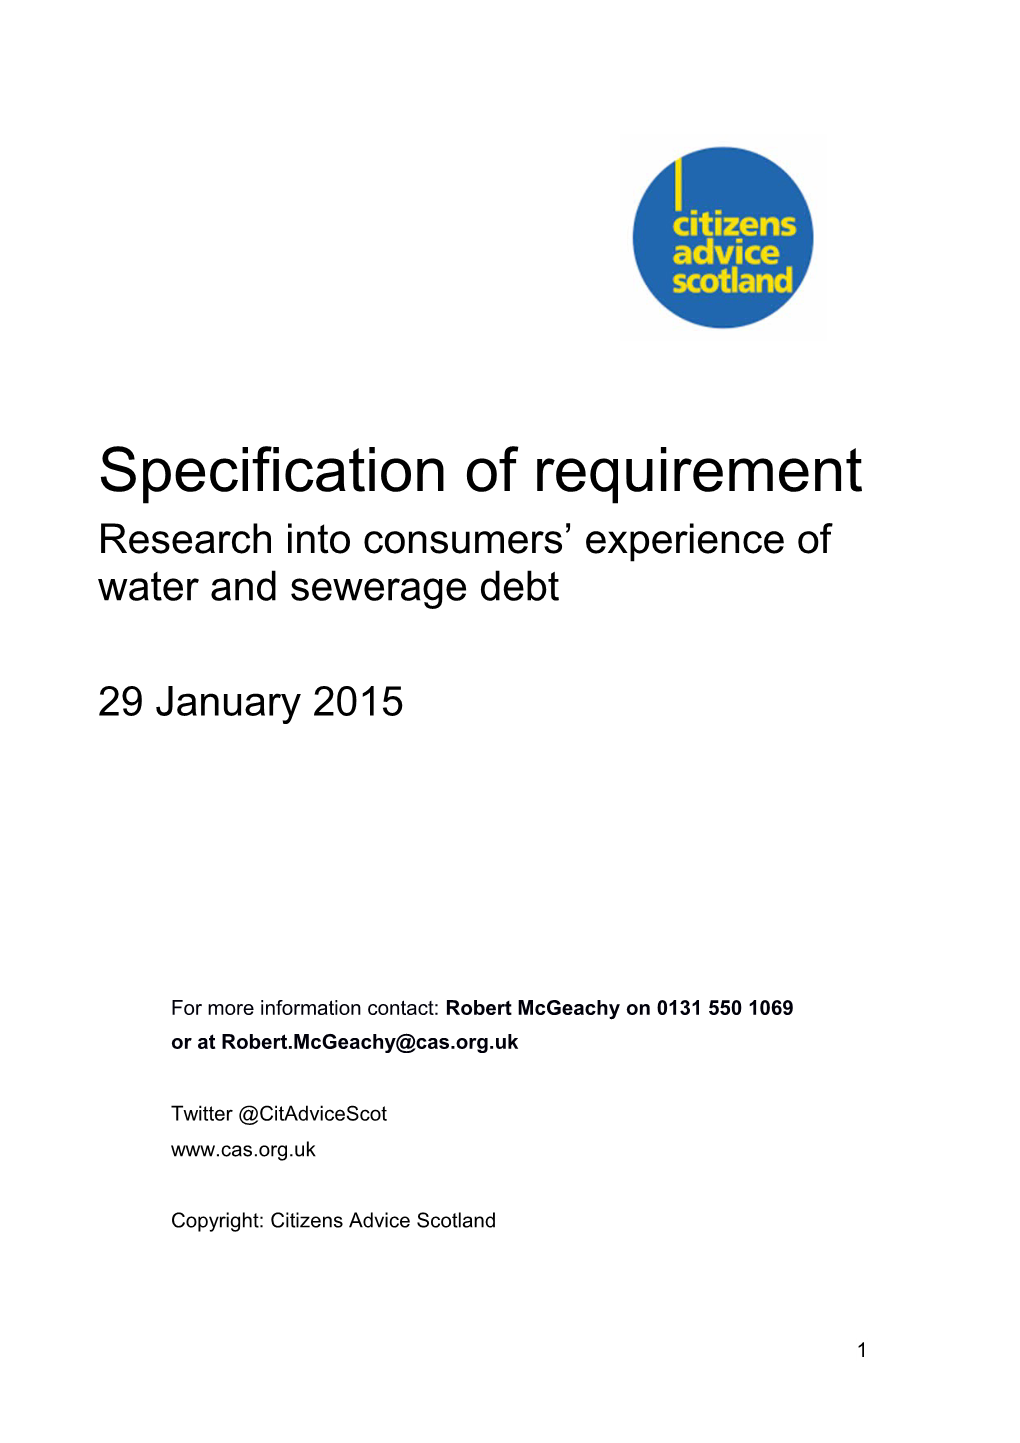 Research Into Consumers Experience of Water and Sewerage Debt